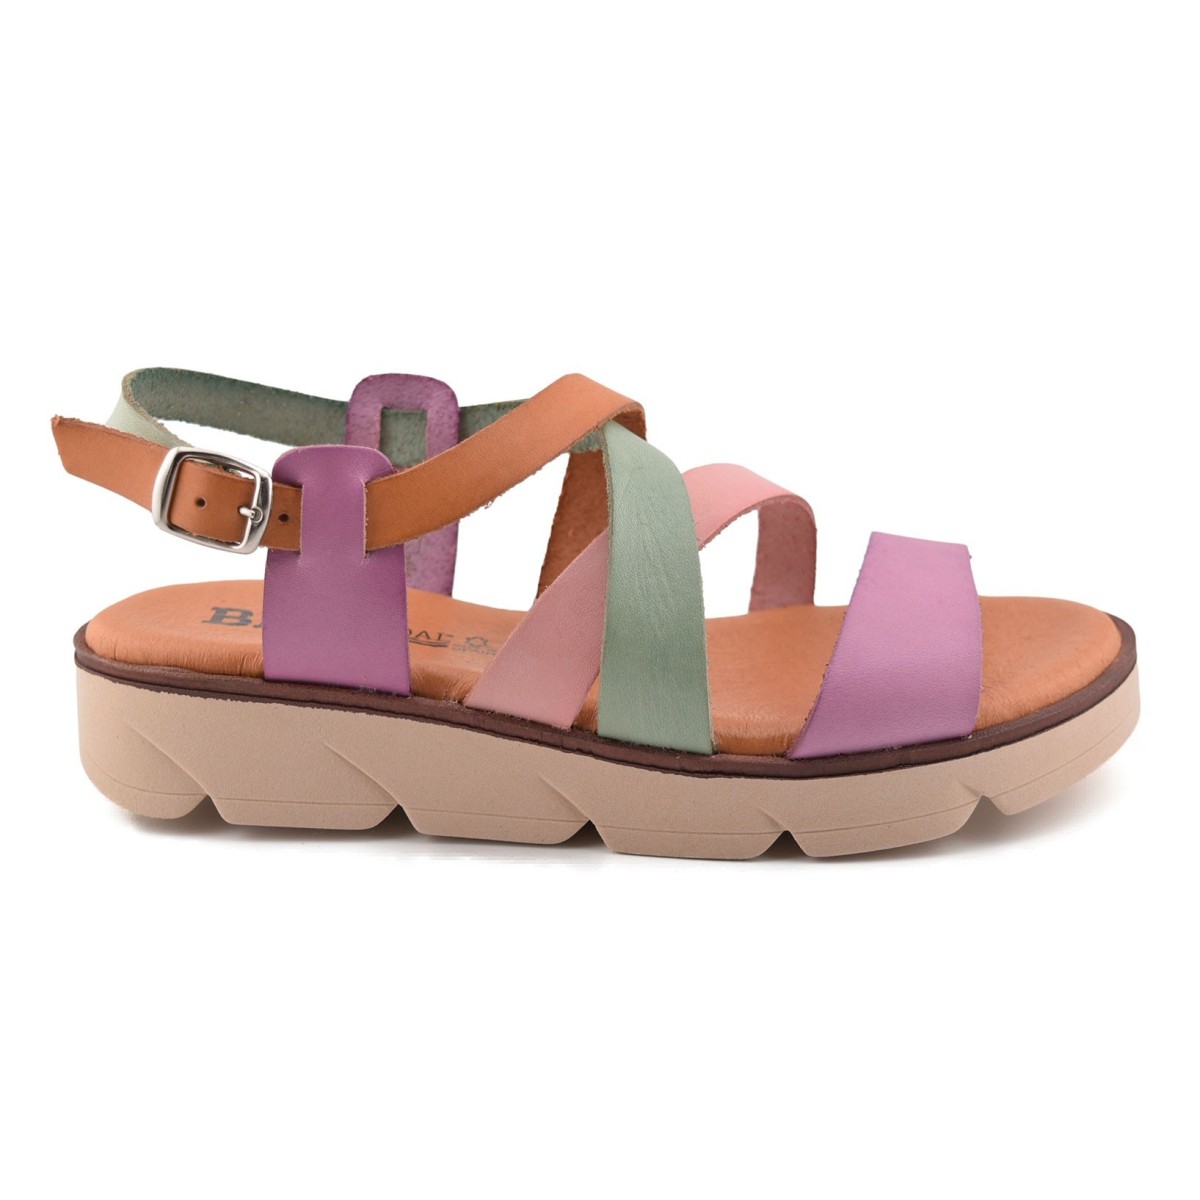 Multicoloured Leather Sandals by Blusandal